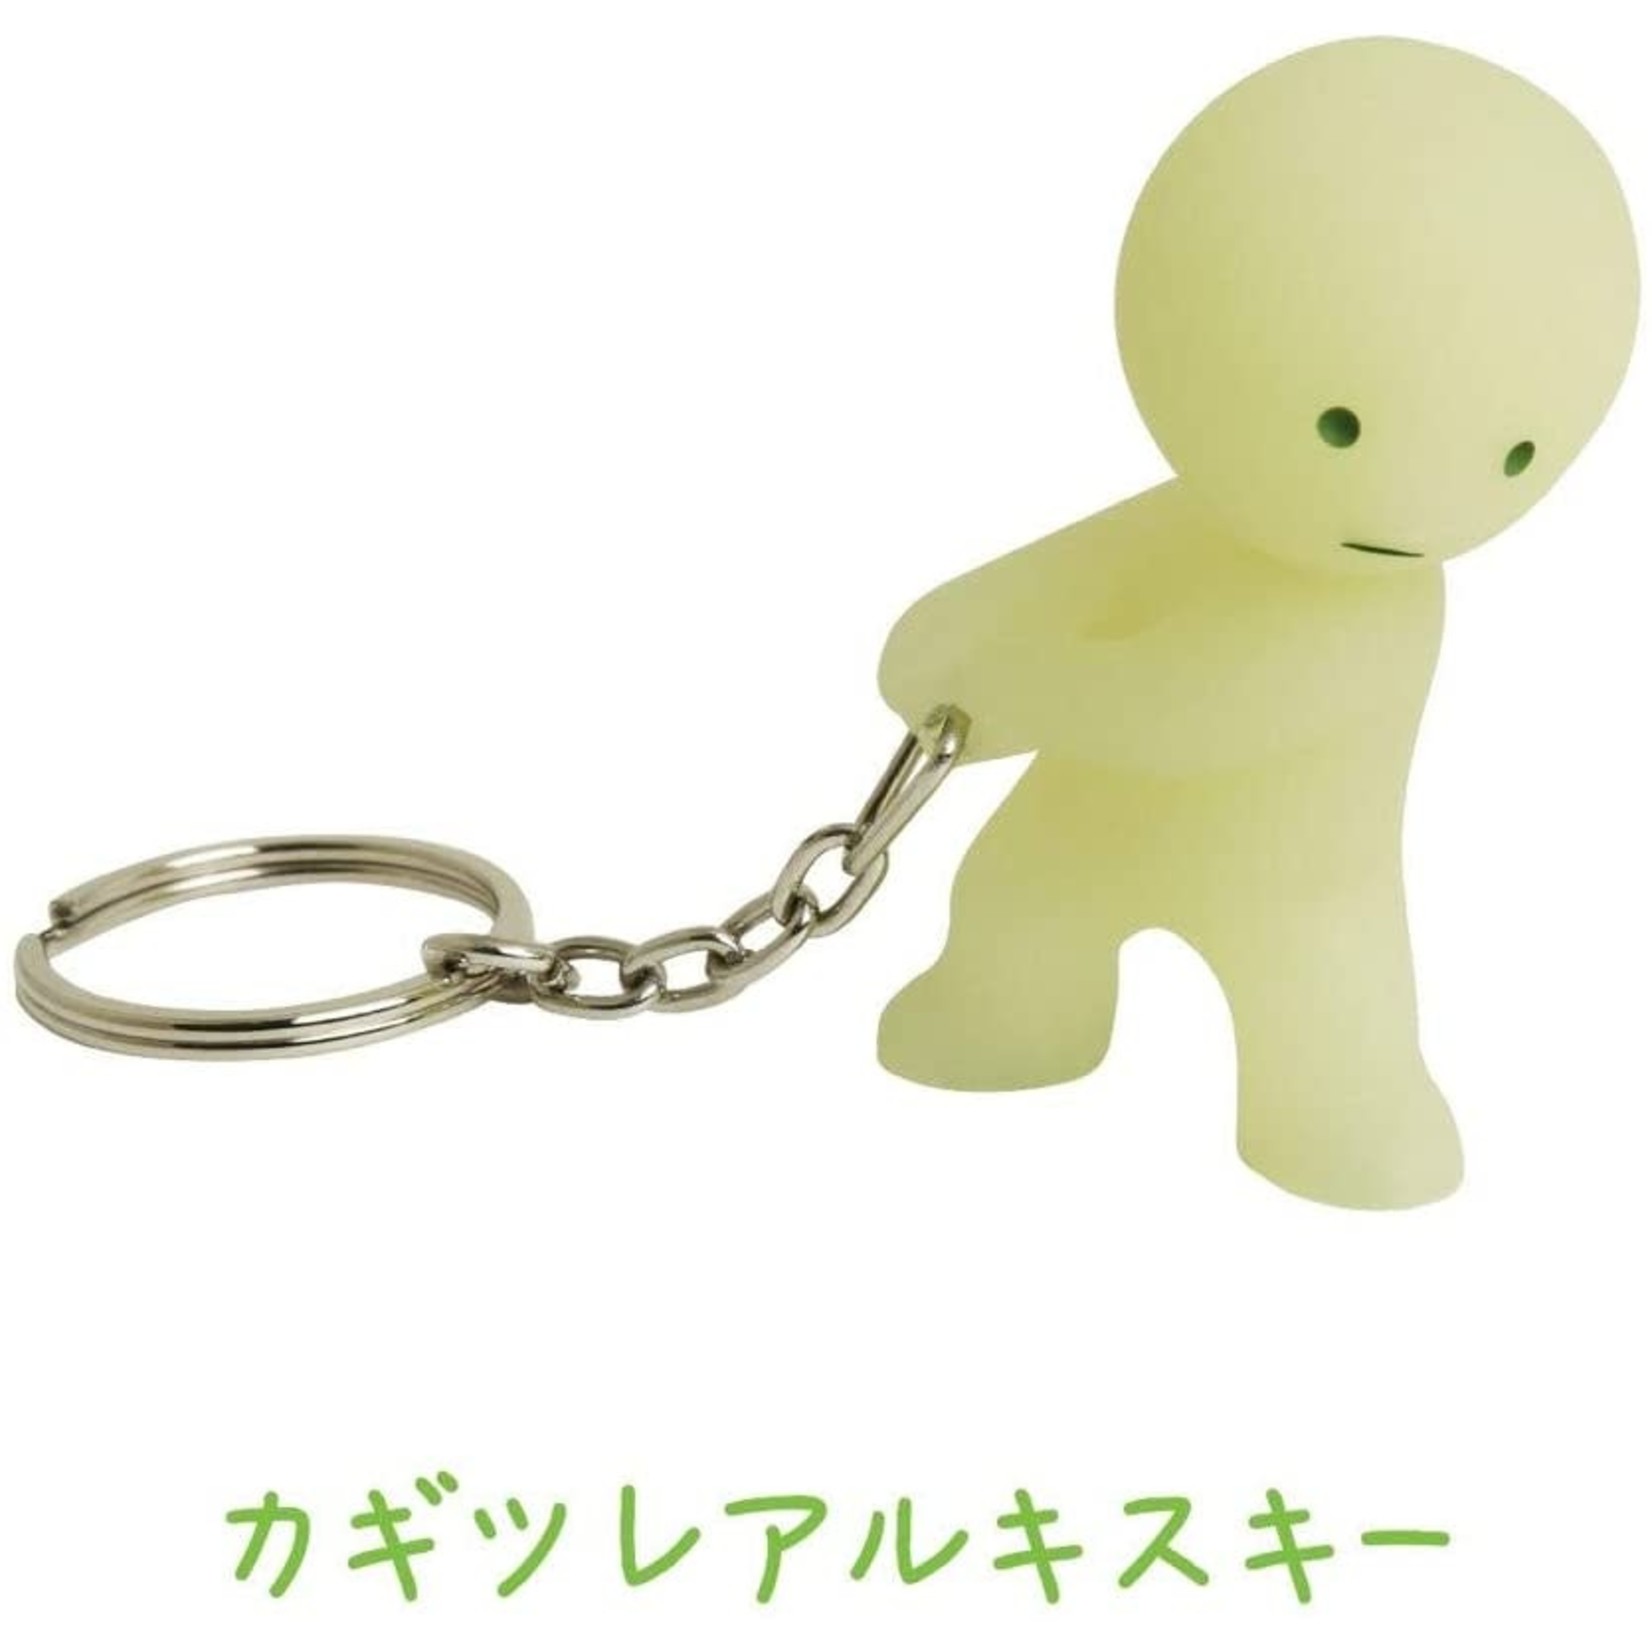 Shop Smiski Keychain with great discounts and prices online - Jan 2024